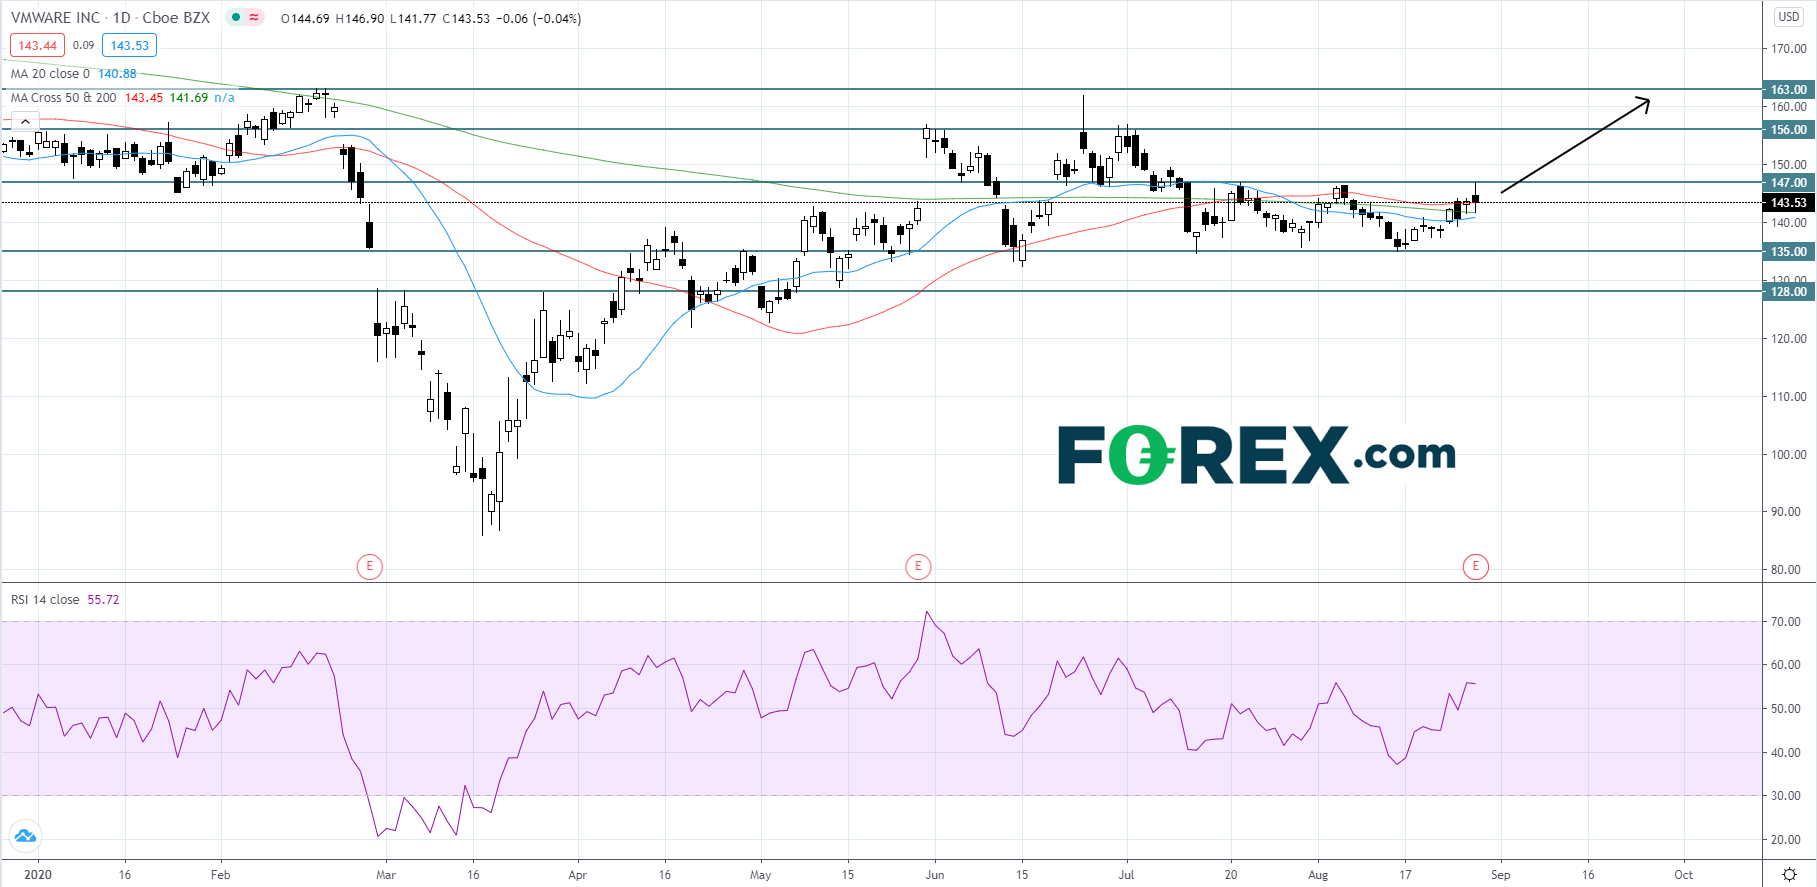 Market chart showing performance of  VMWare. Published August 2020 by FOREX.com